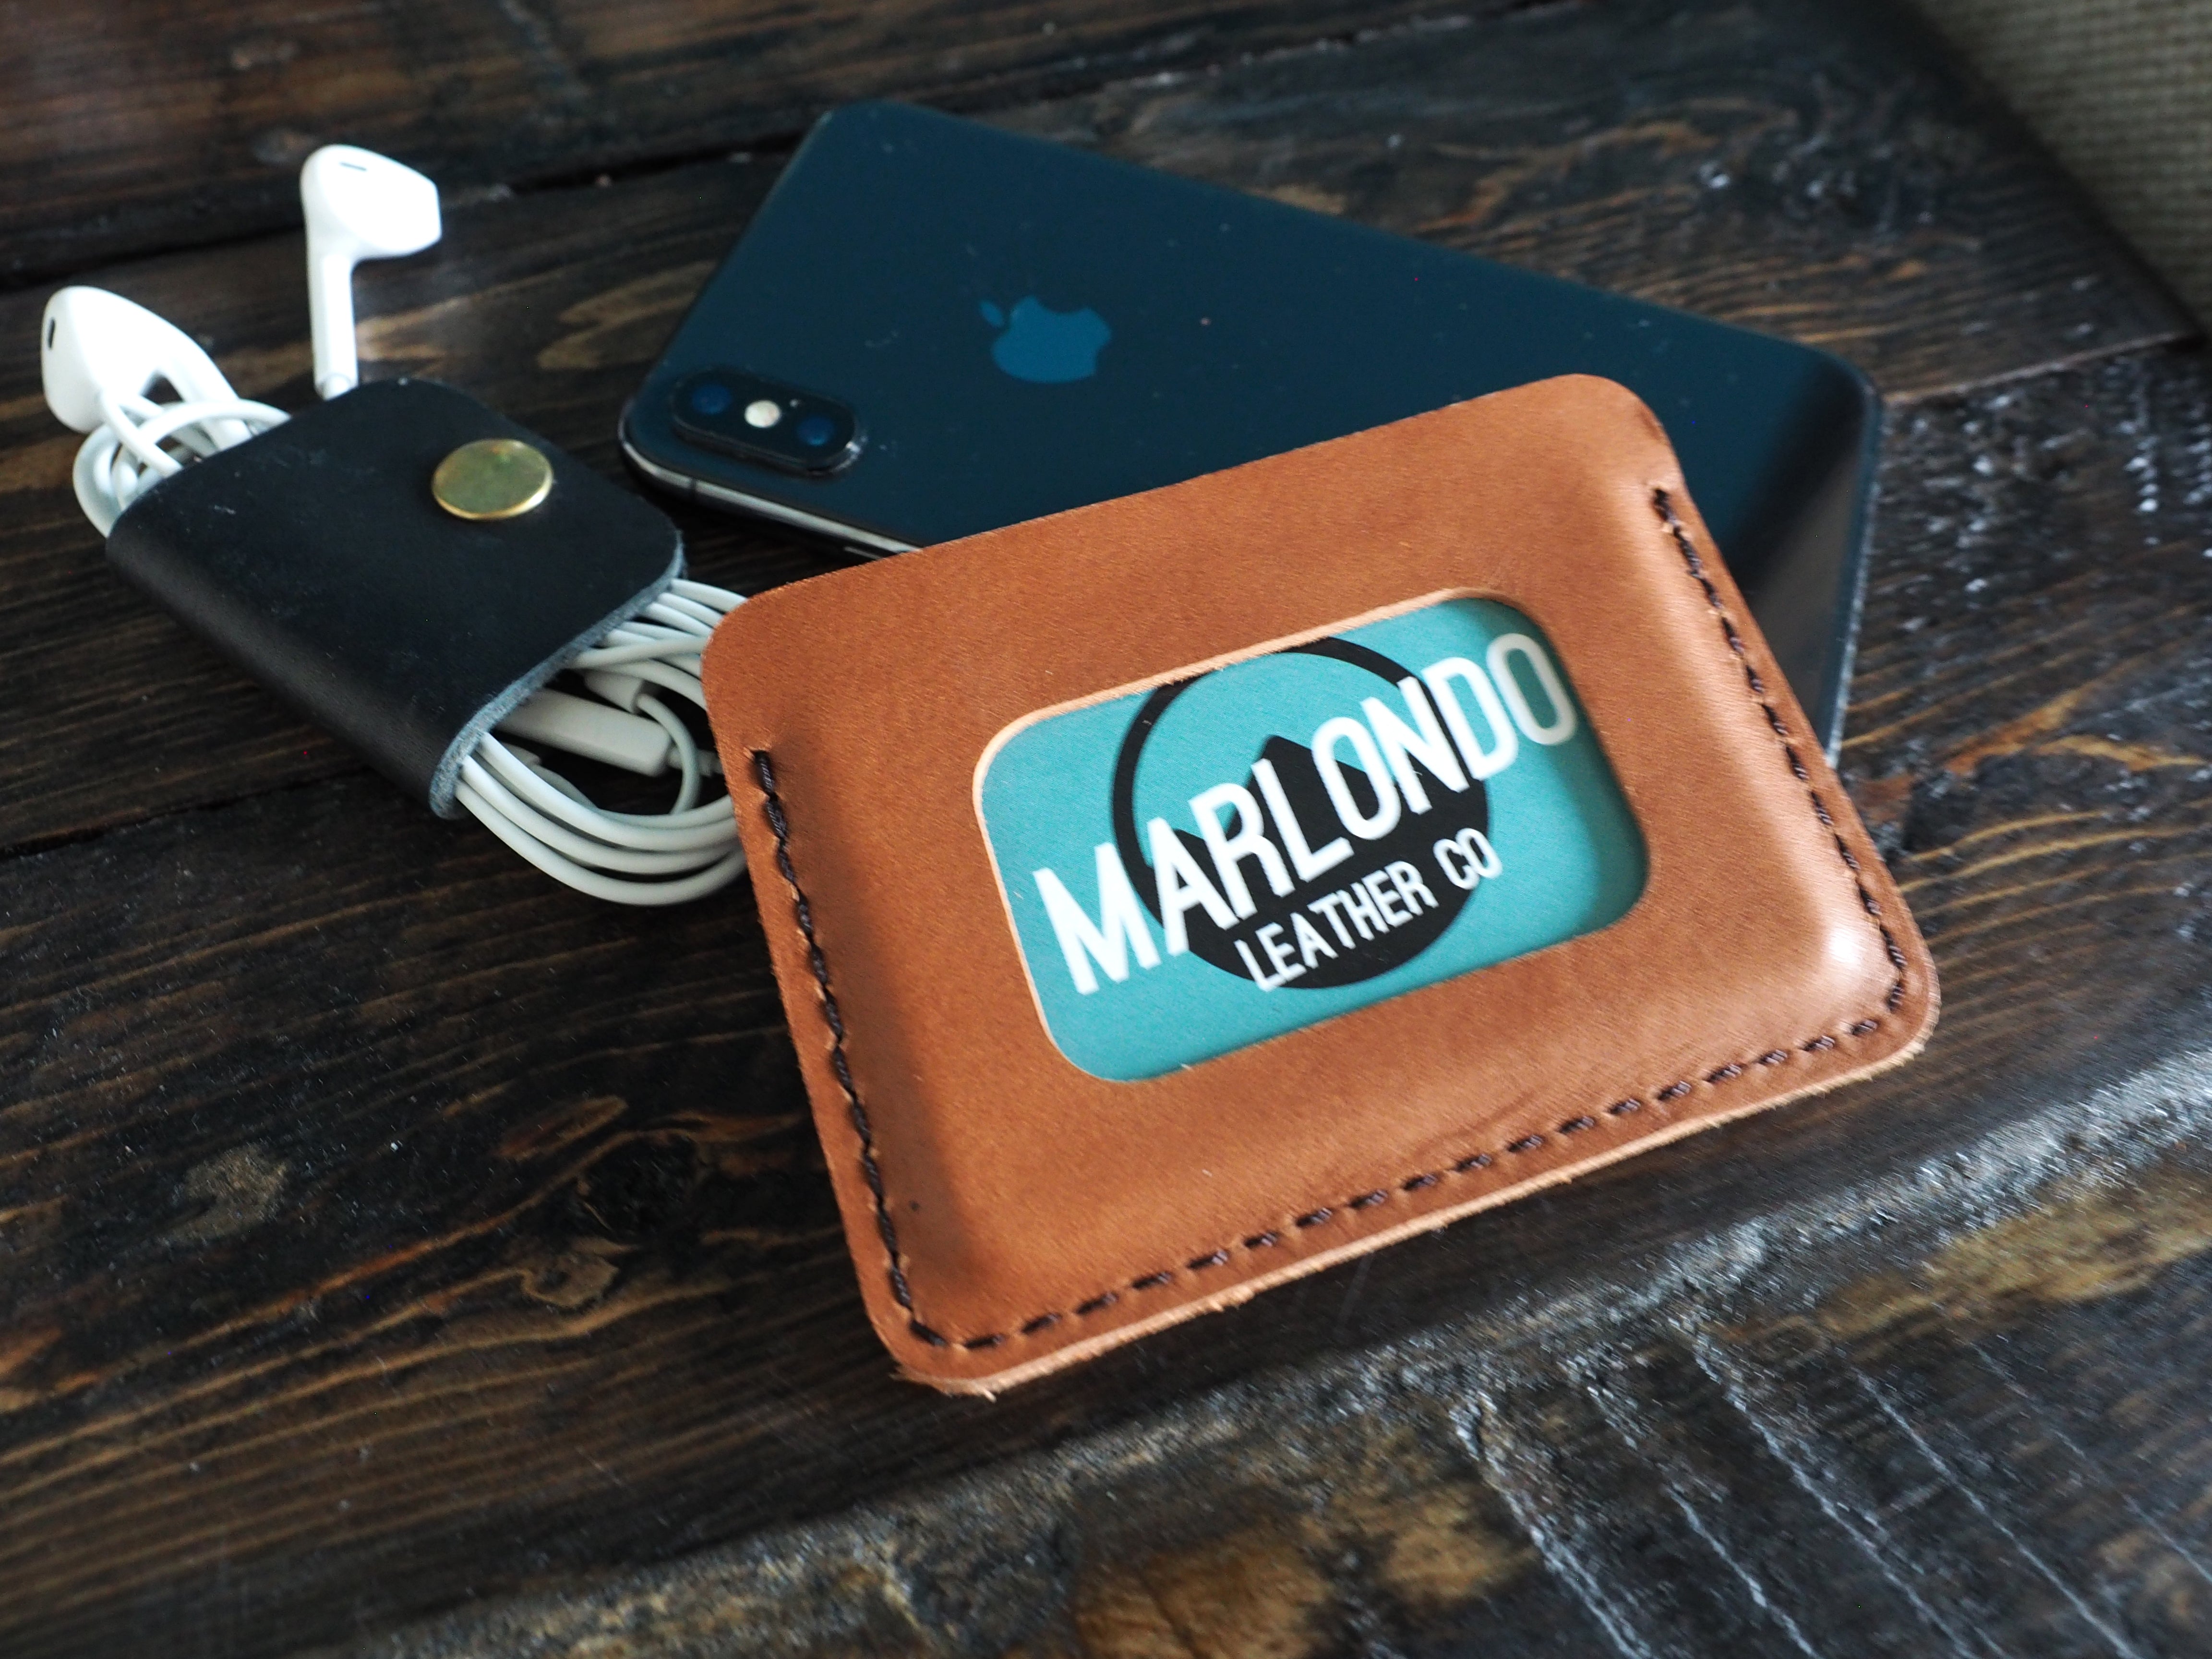 DS-021 The Eddy Leather Wallet Digital Pattern by Rocky Mountain Leather Supply